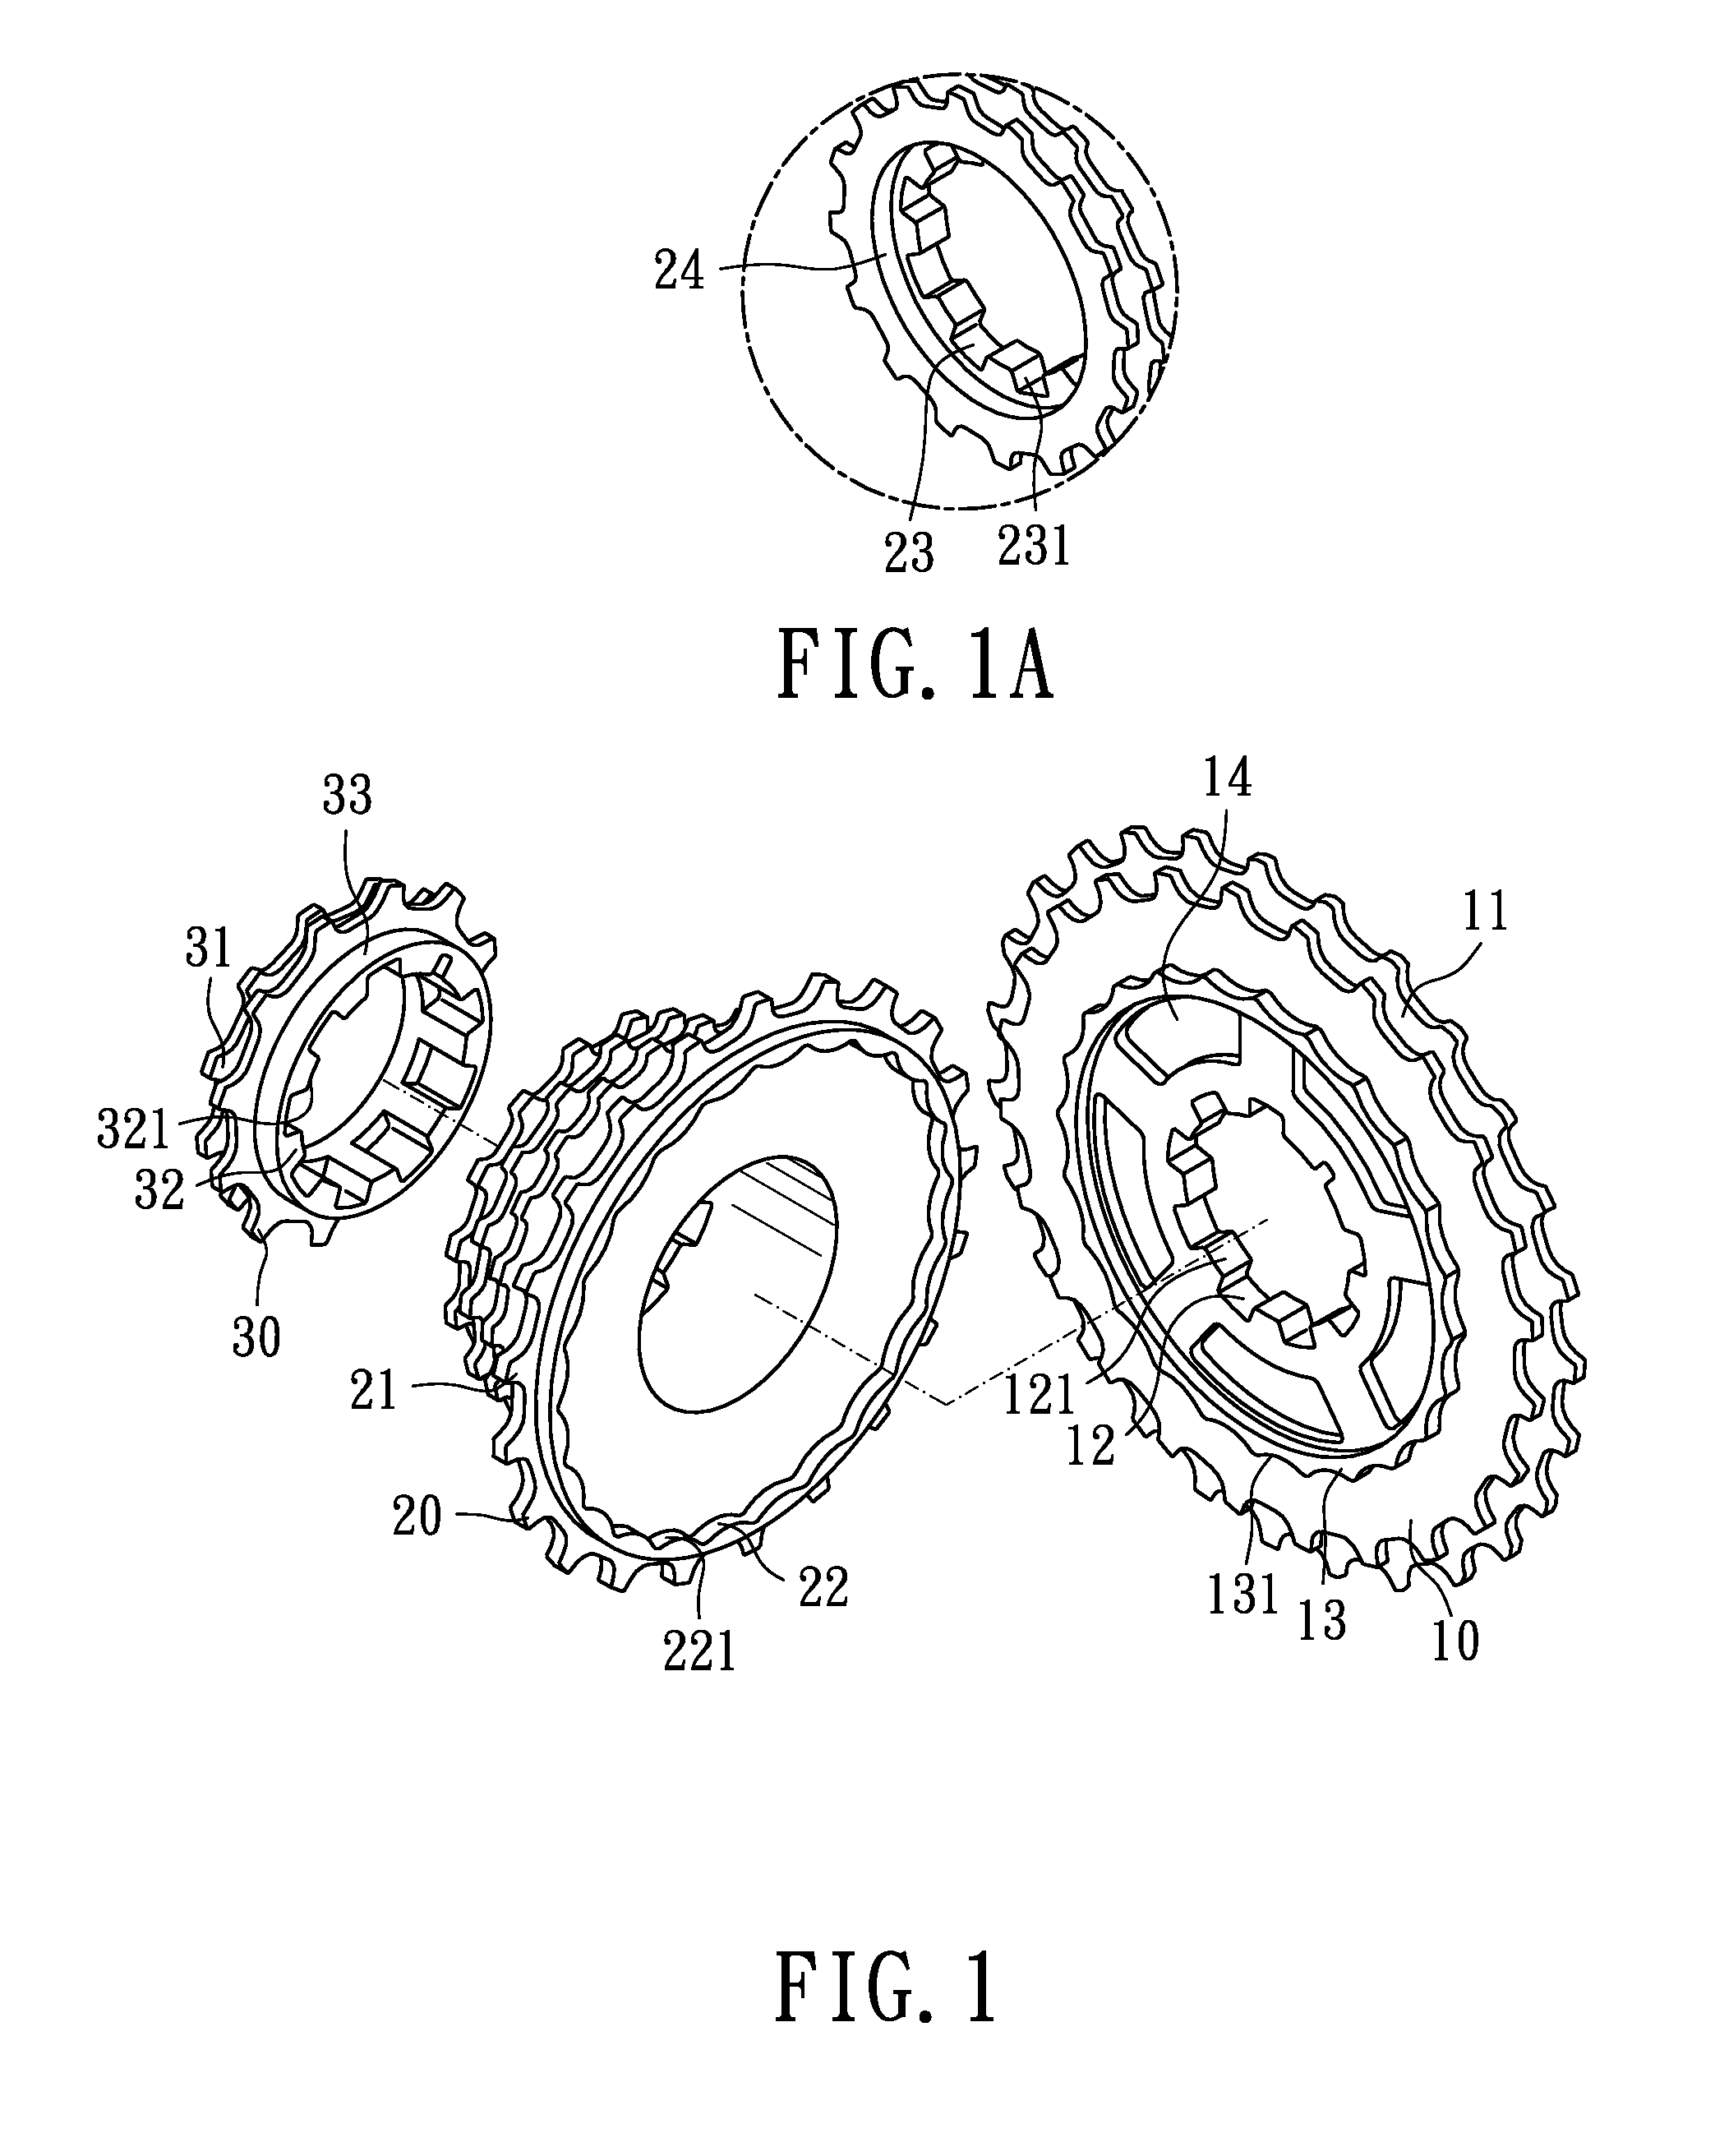 Bicycle sprocket assembly